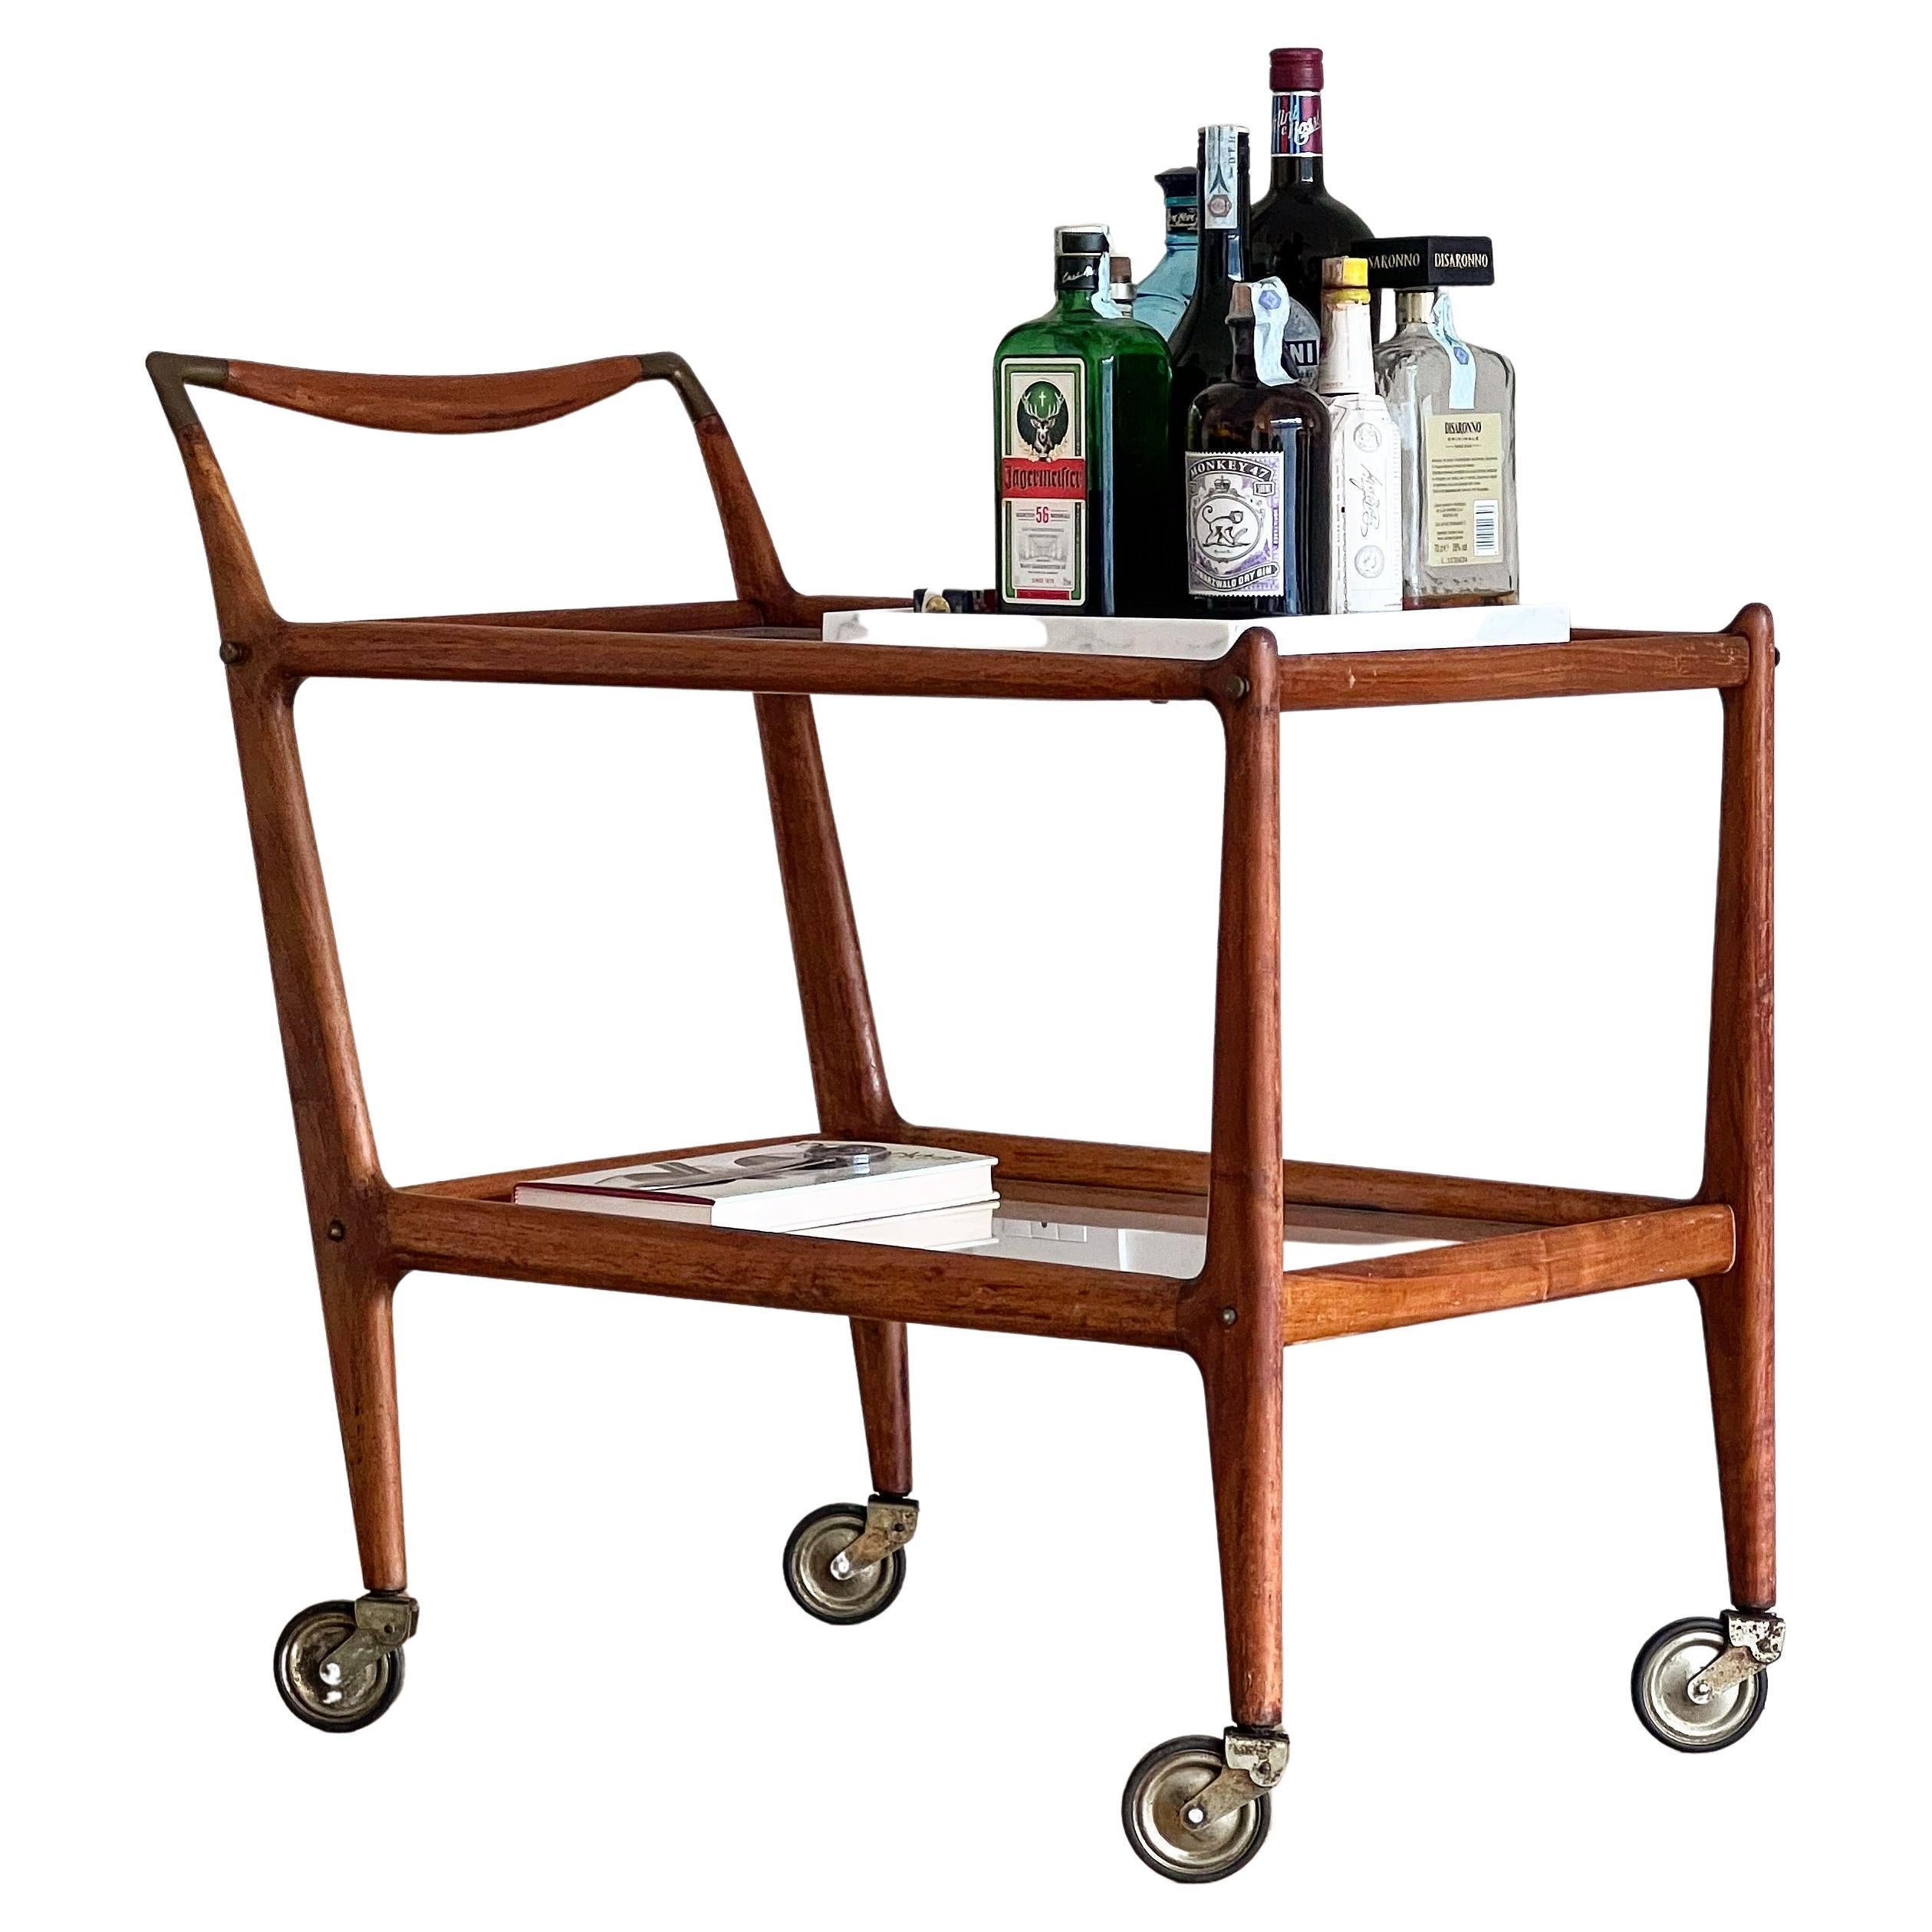 Vintage italian "Number 58" wood and glass bar cart by Ico Parisi for De Baggis